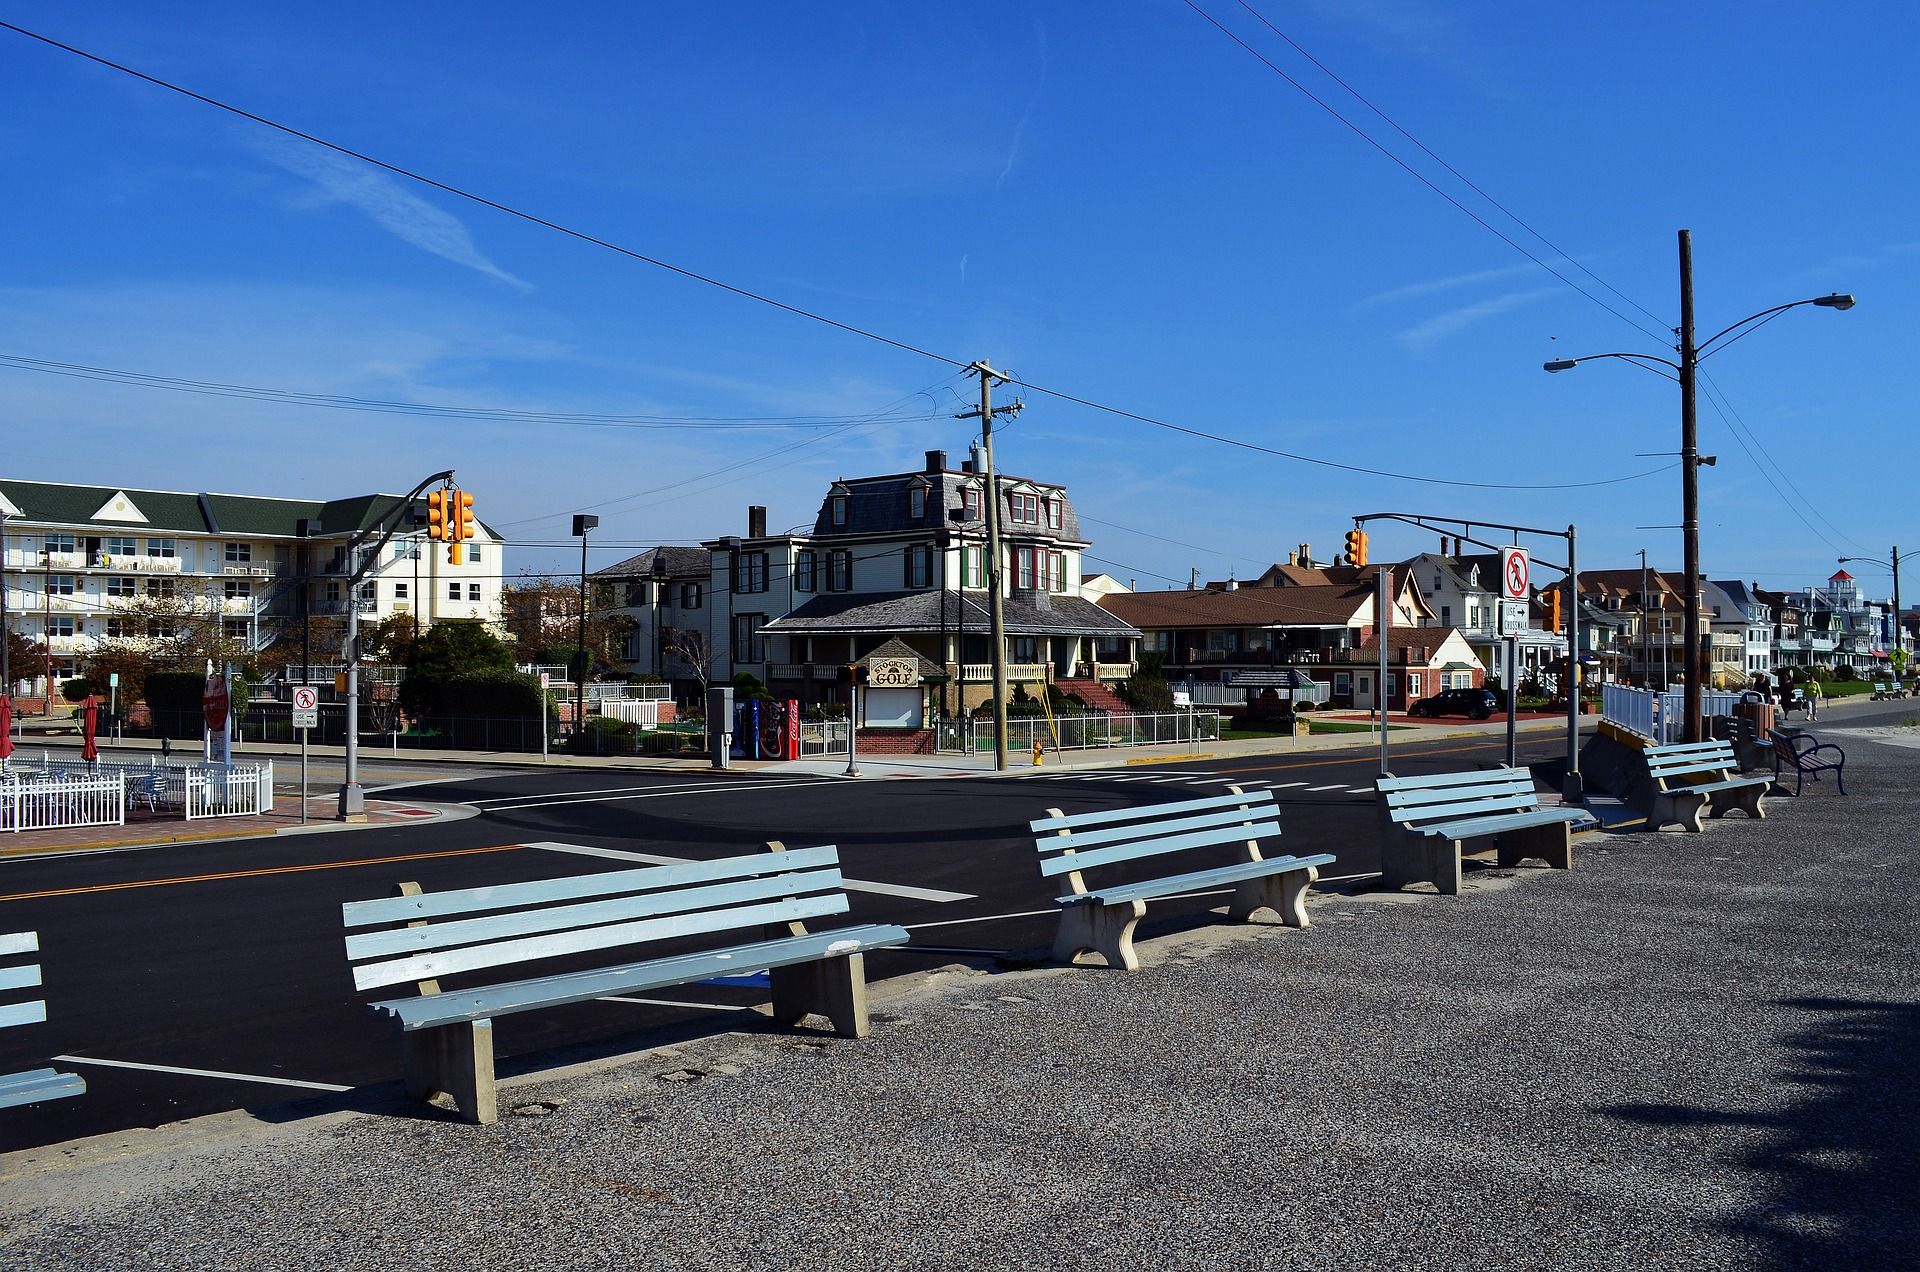 Benches by the ocean in Cape May, New Jersey